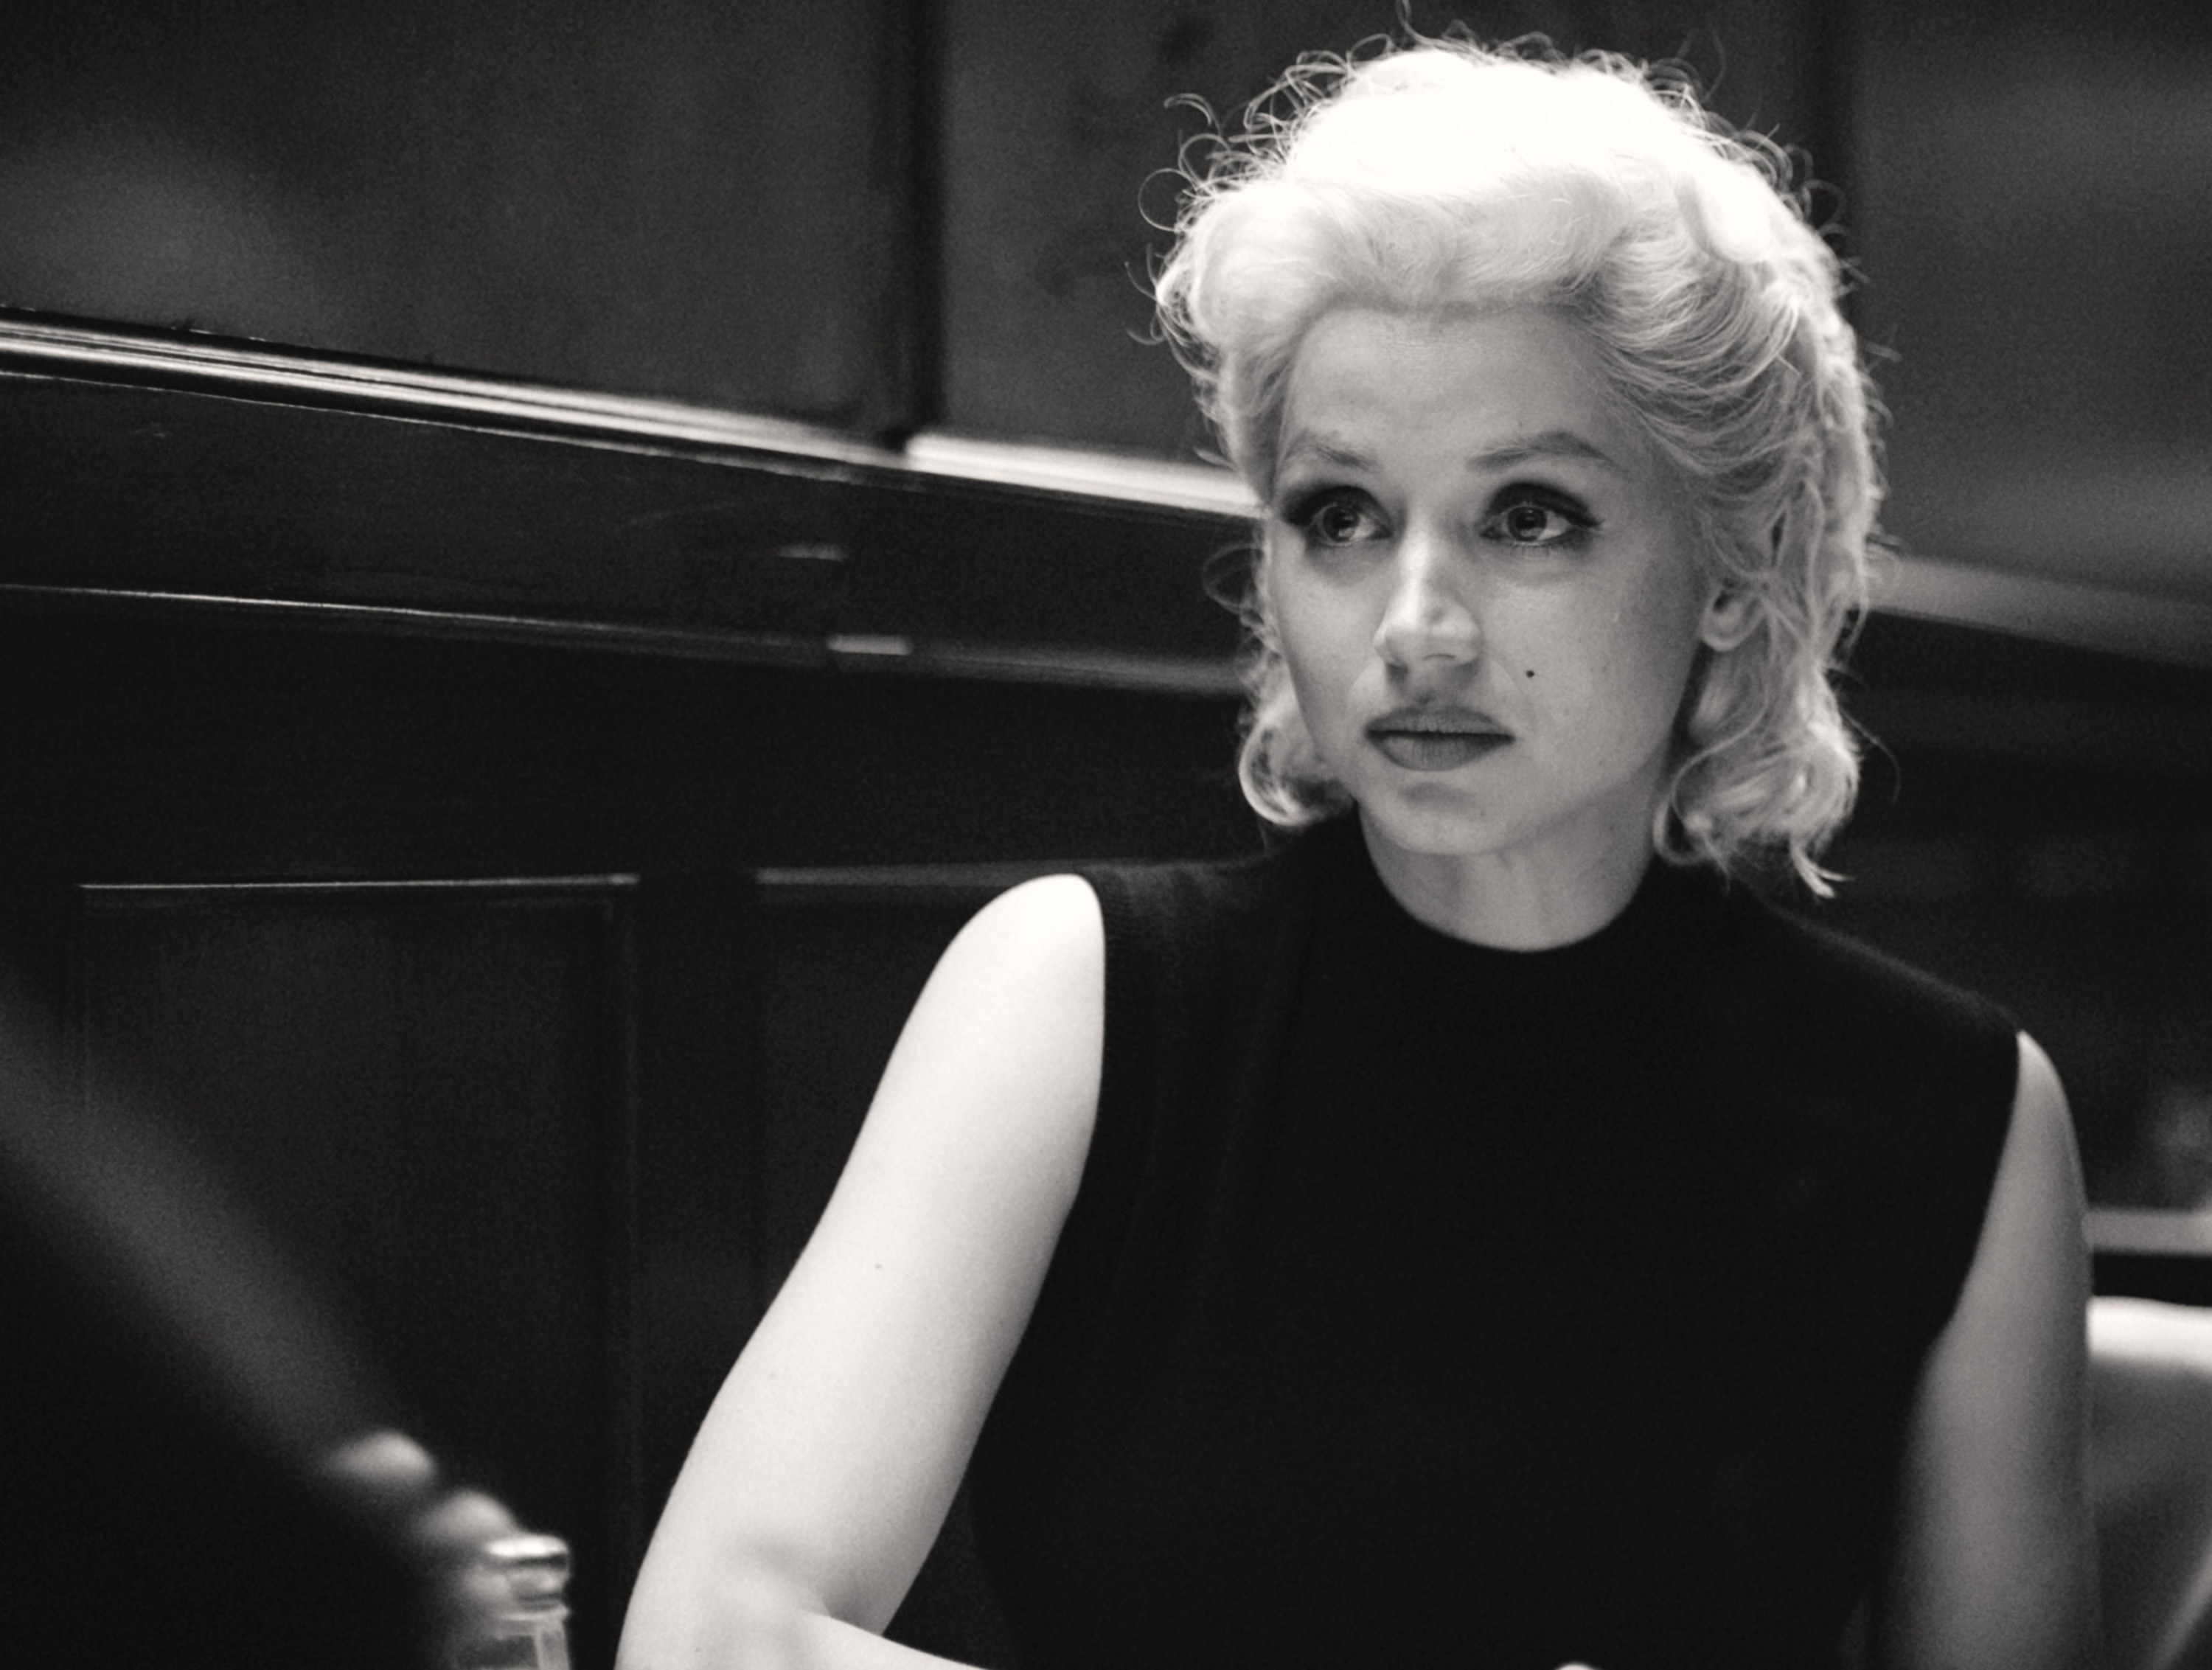 Ana as Marilyn sitting and facing someone in a scene from &quot;Blonde.&quot; Ana is wearing a blonde wig and a sleeveless top